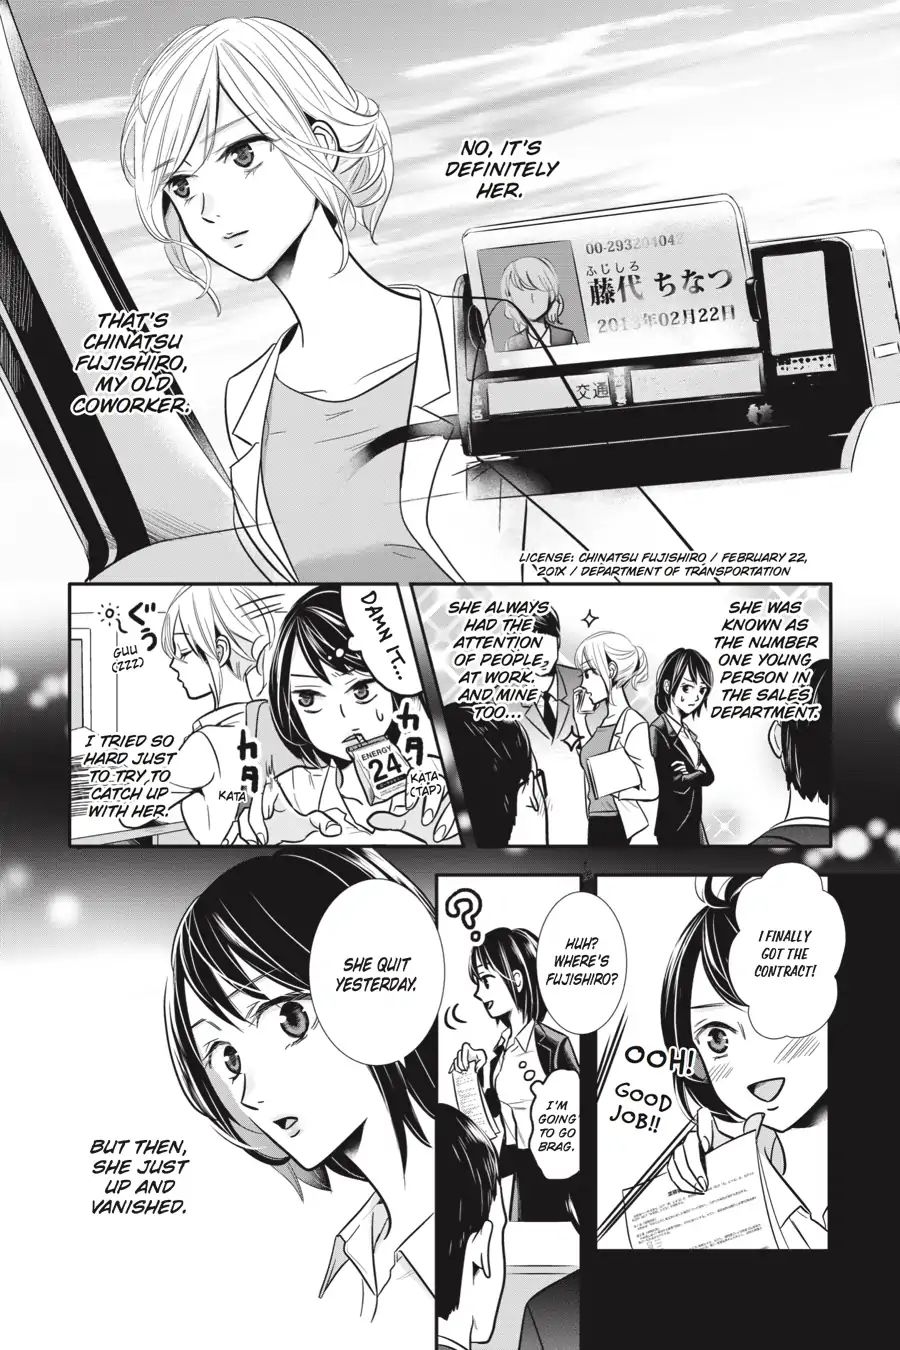 Every Time We Meet Eye To Eye, I Fall In Love With Her Vol.1 Chapter: Seta Seta - Stopped Meter - Picture 3